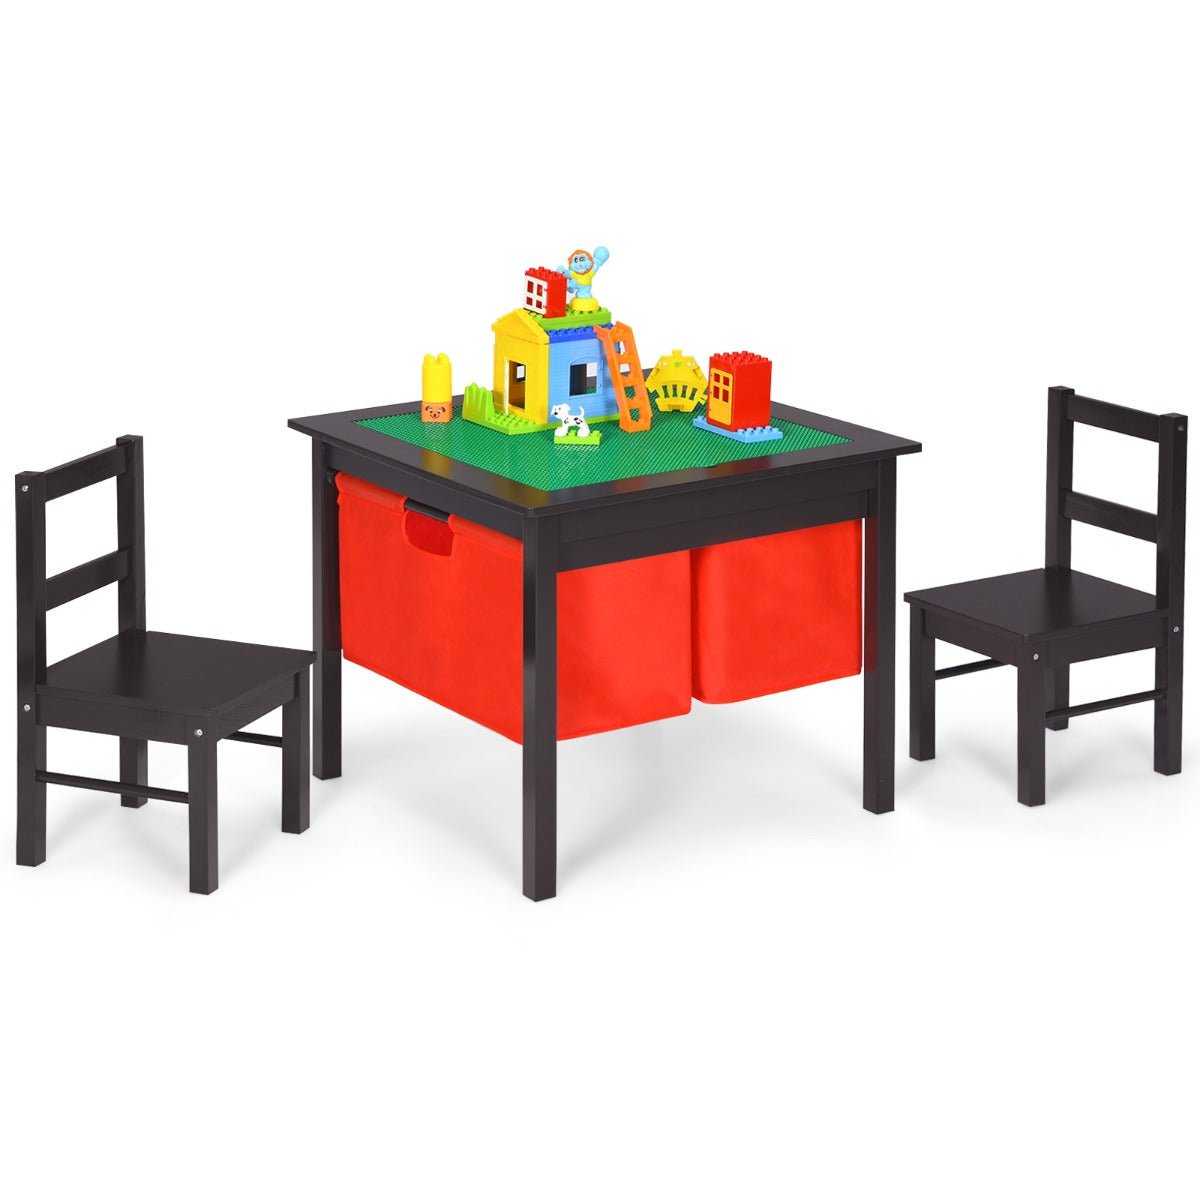 Cheerful Playtime Table and Chairs